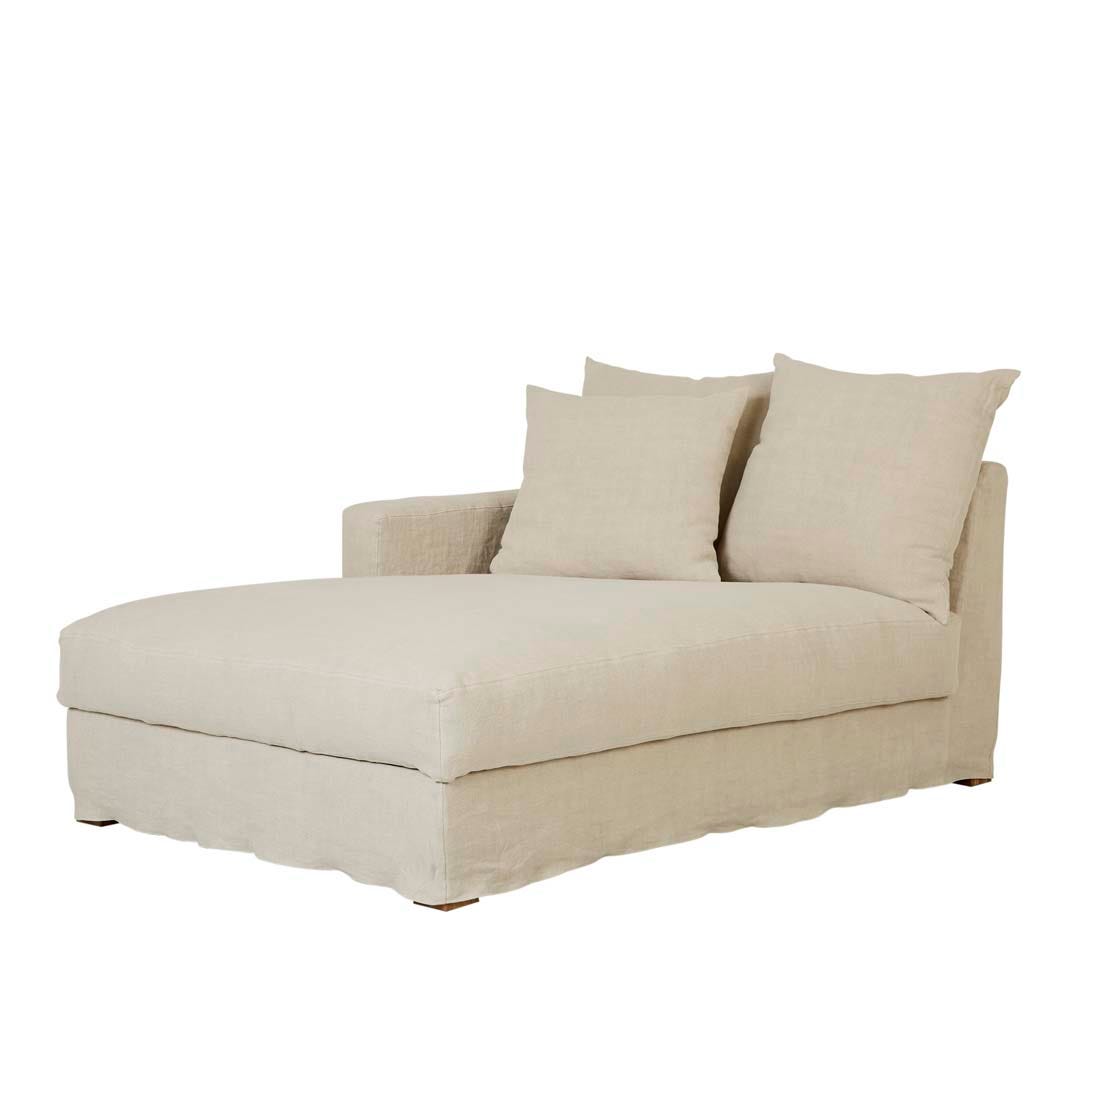 Sketch Sloopy Left Chaise Sofa - GlobeWest